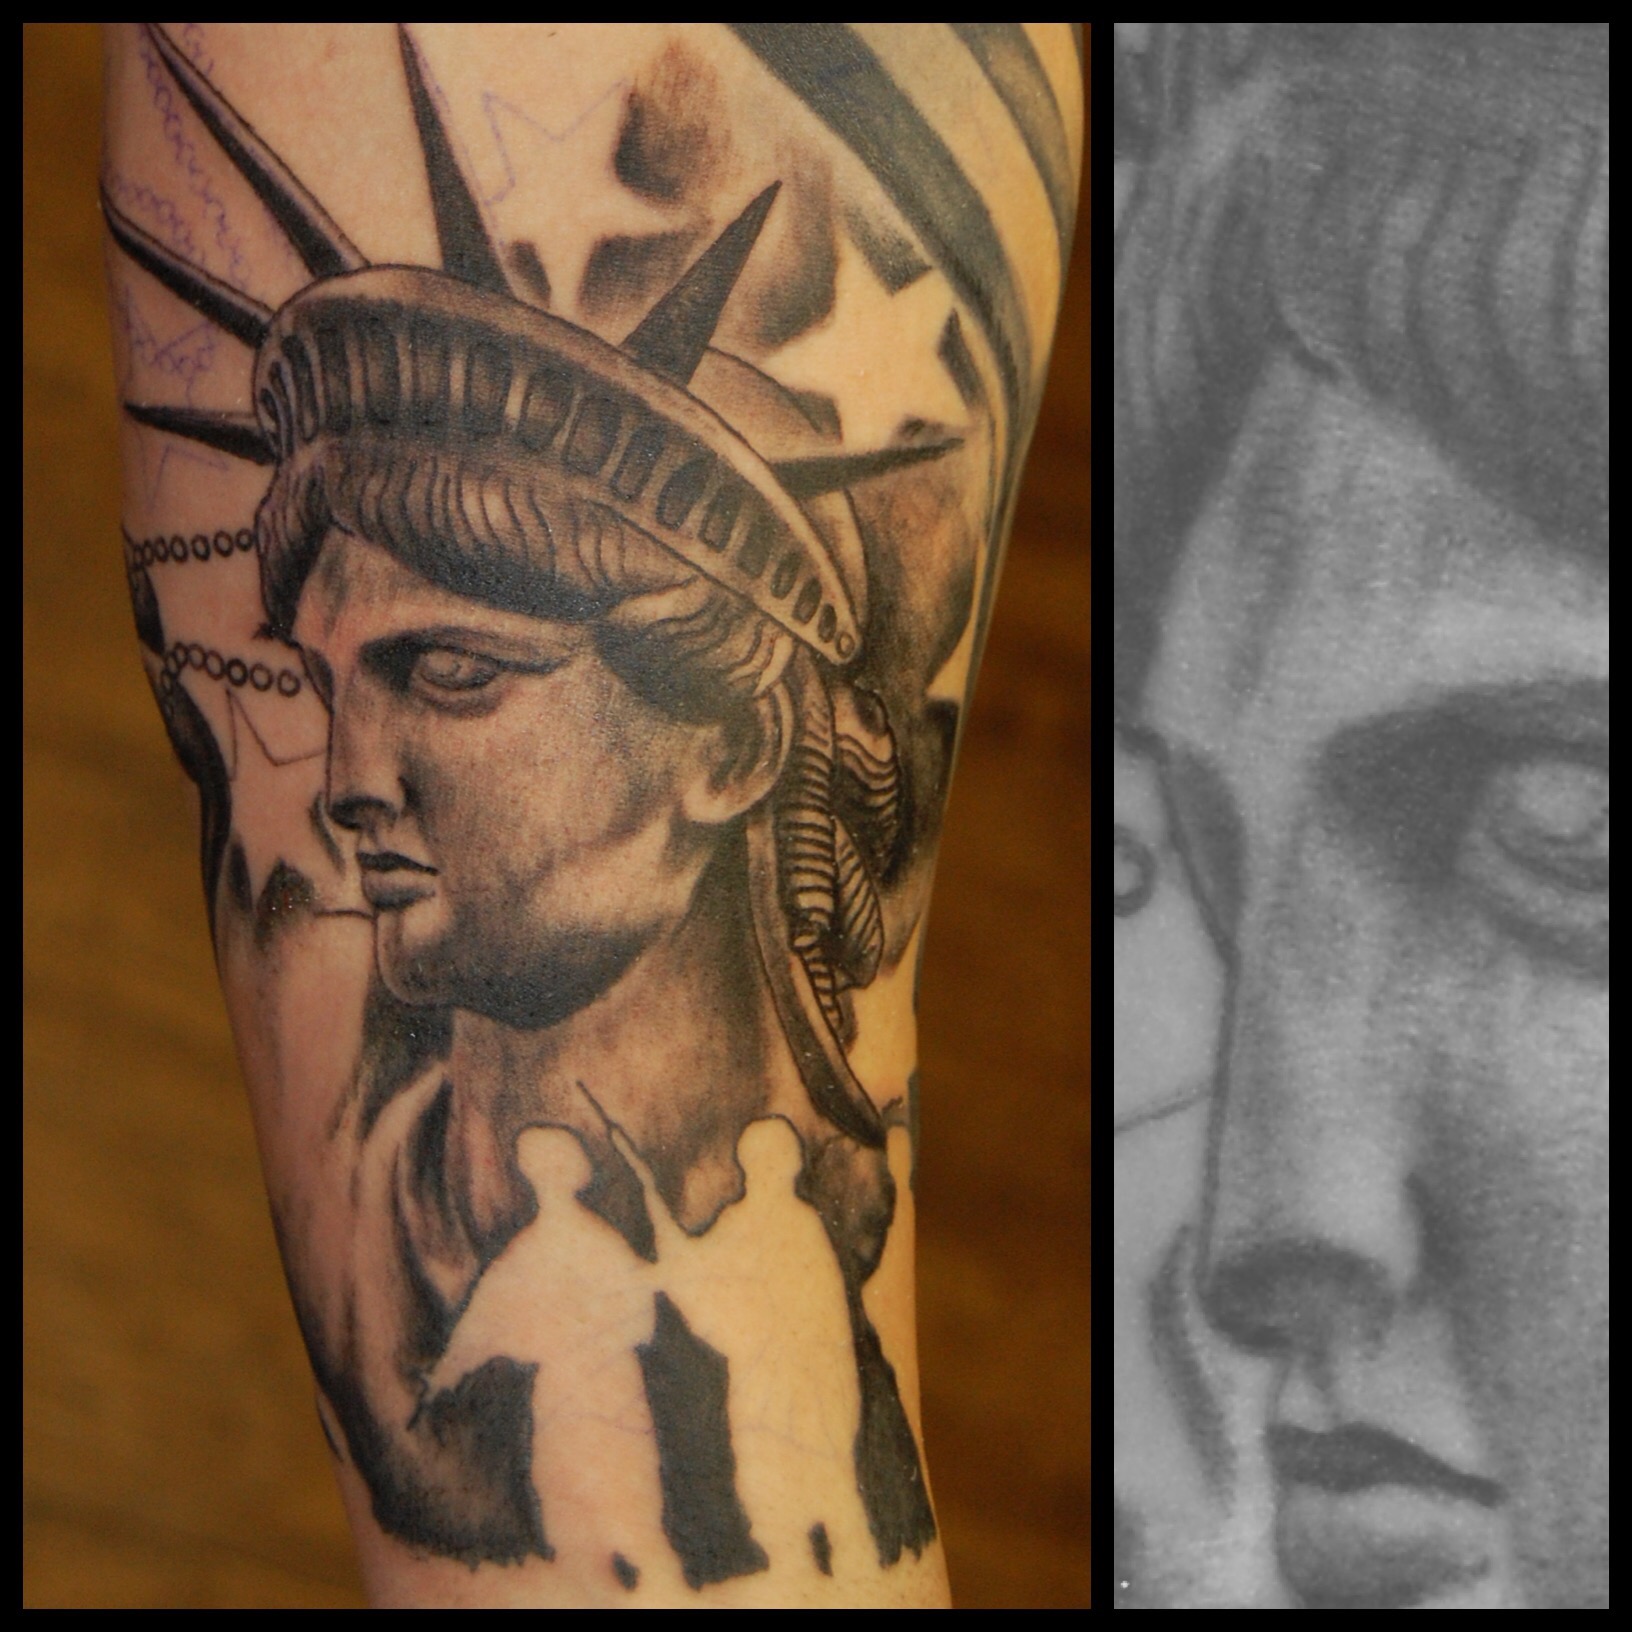 StatueOfLiberty tattoo meanings  popular questions